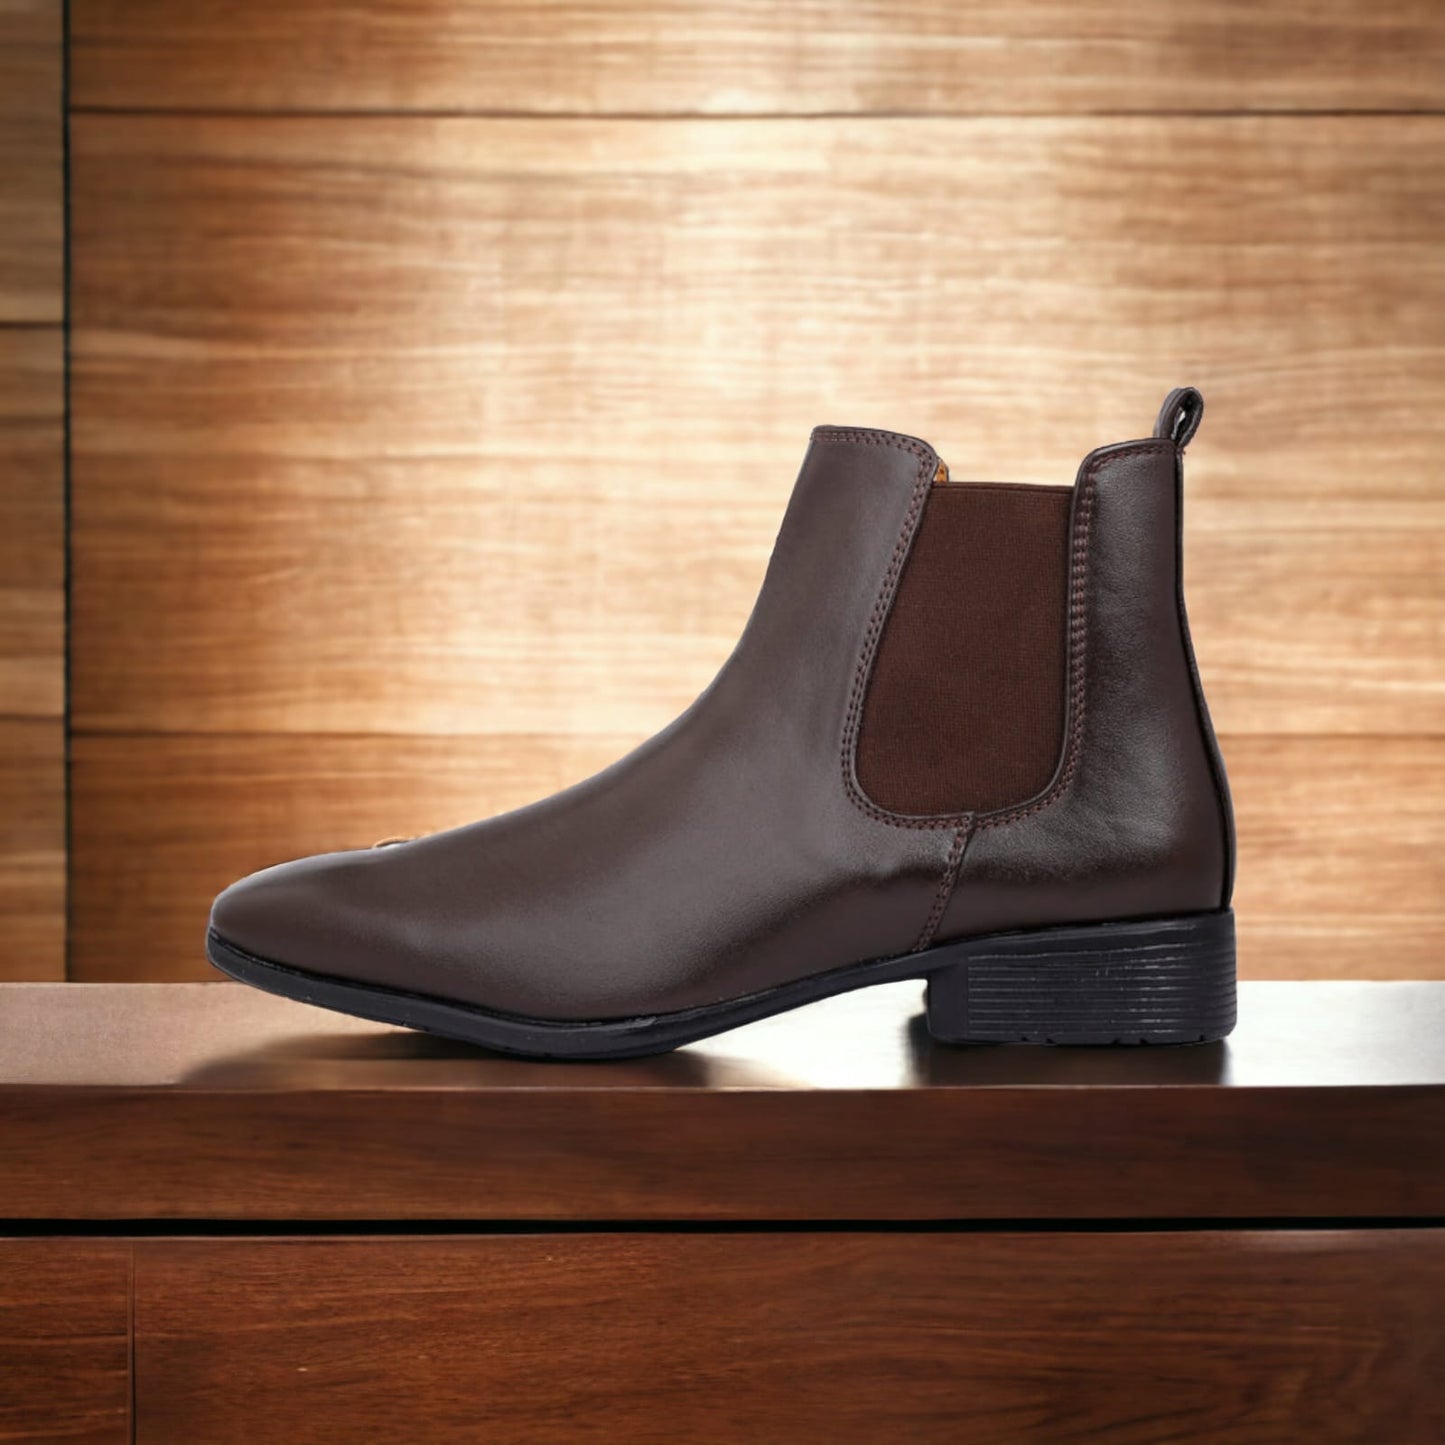 Jack Marc Men's Stylish Brown Formal and Casual Wear British Chelsea Ankle Boots - JACKMARC.COM